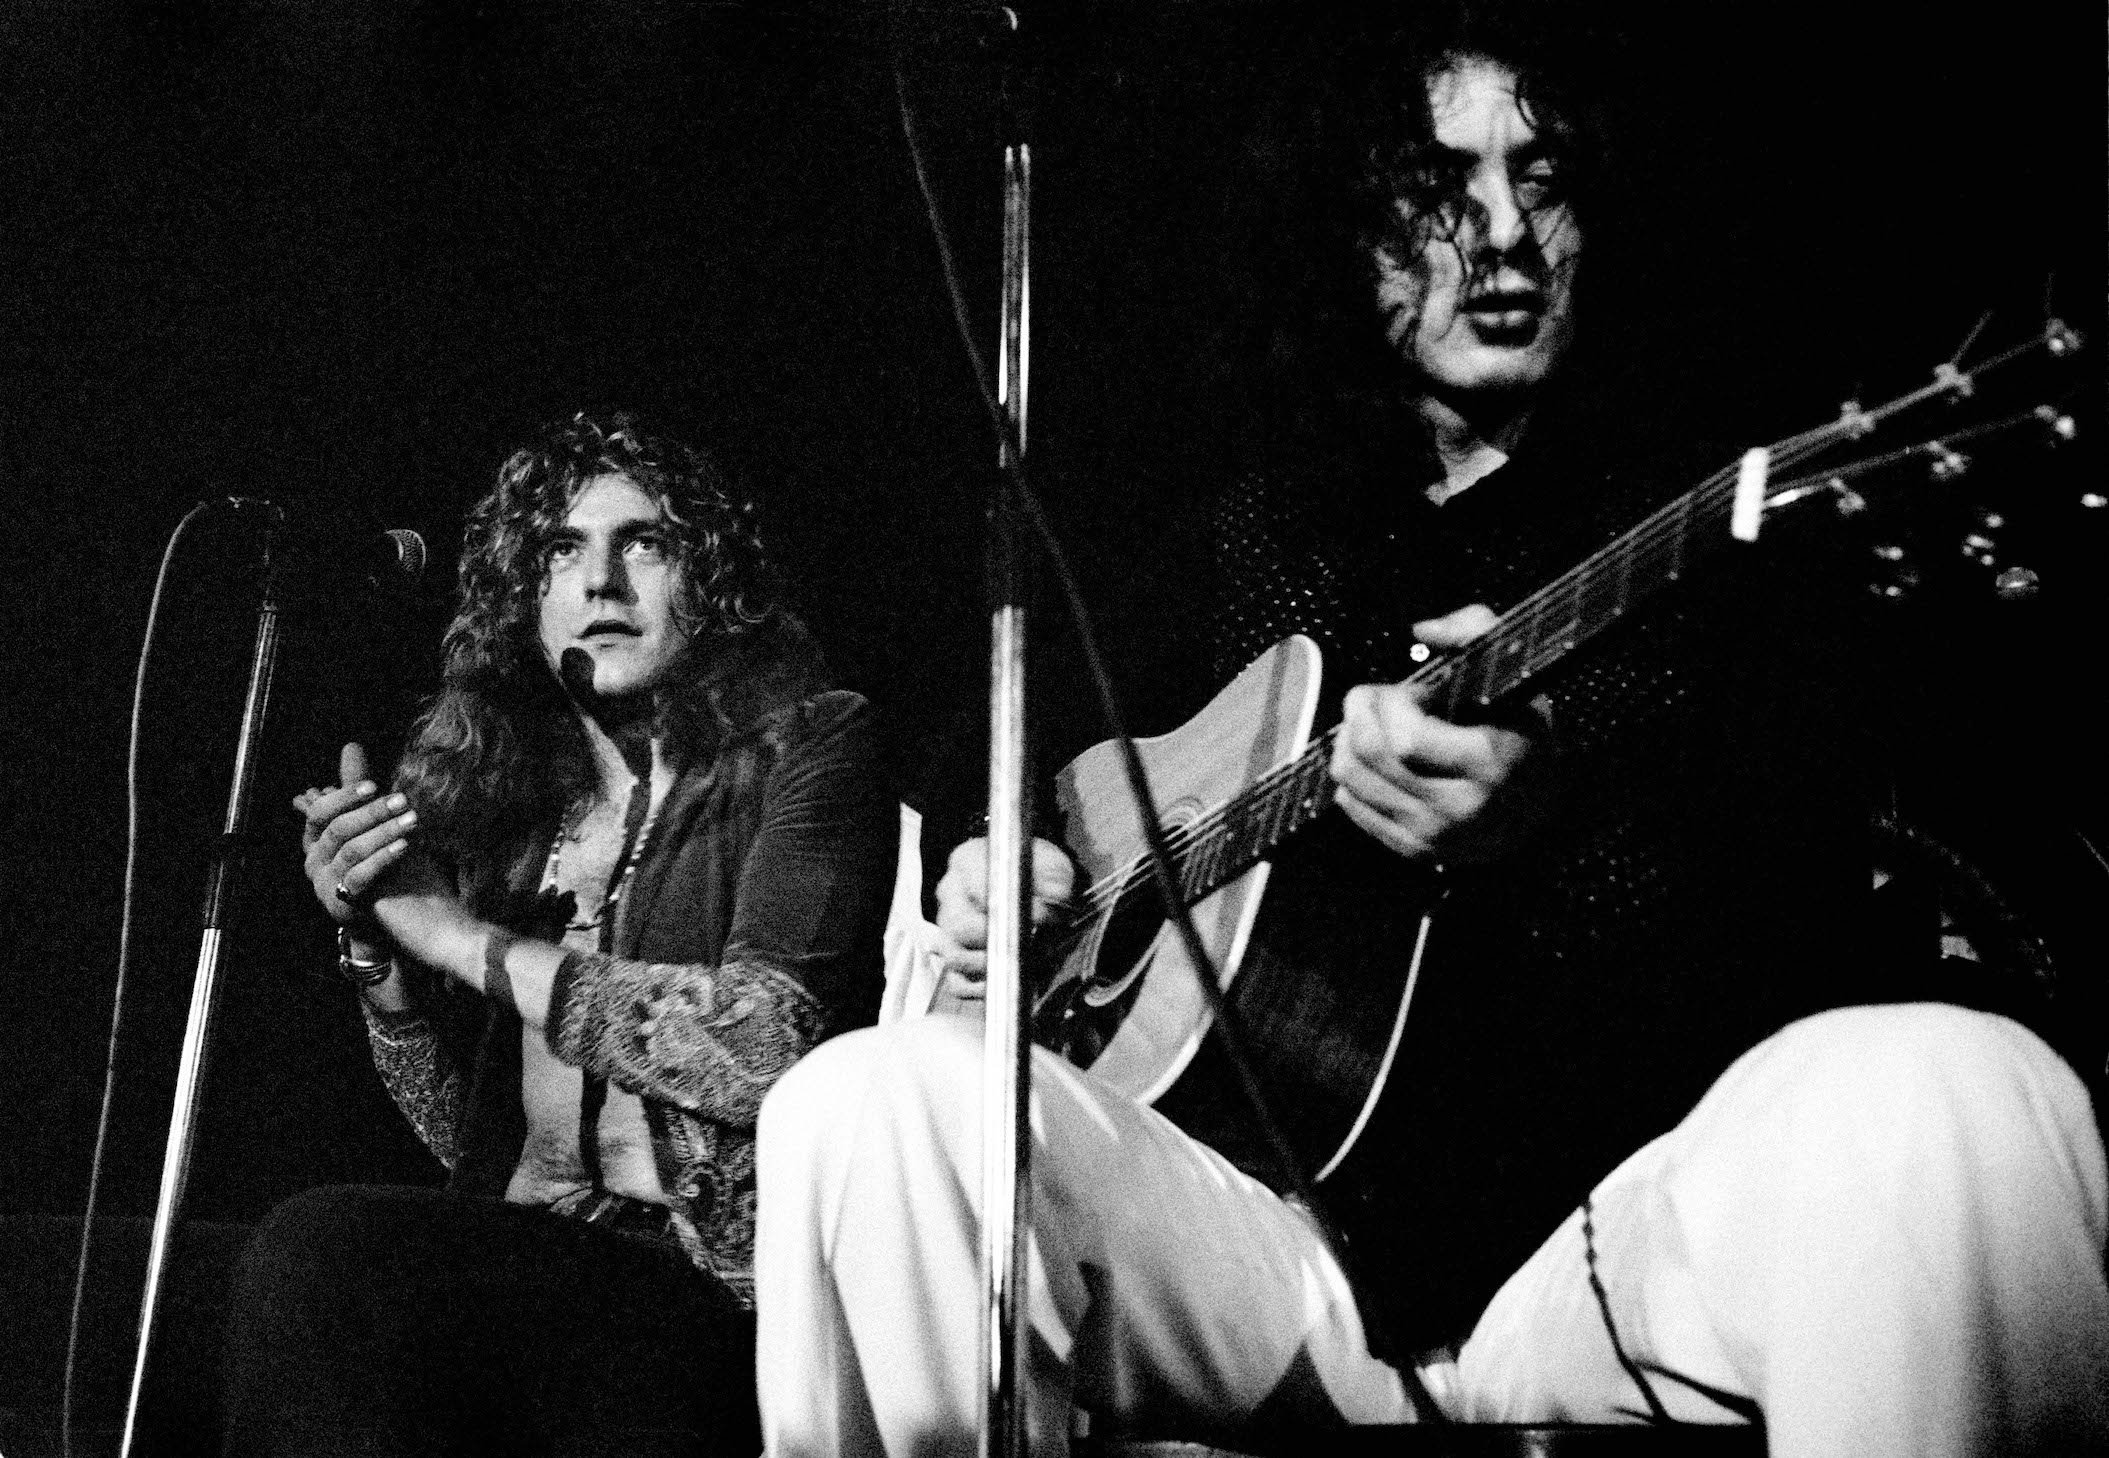 Robert Plant and Jimmy Page of Led Zeppelin perform in Copenhagen, Denmark